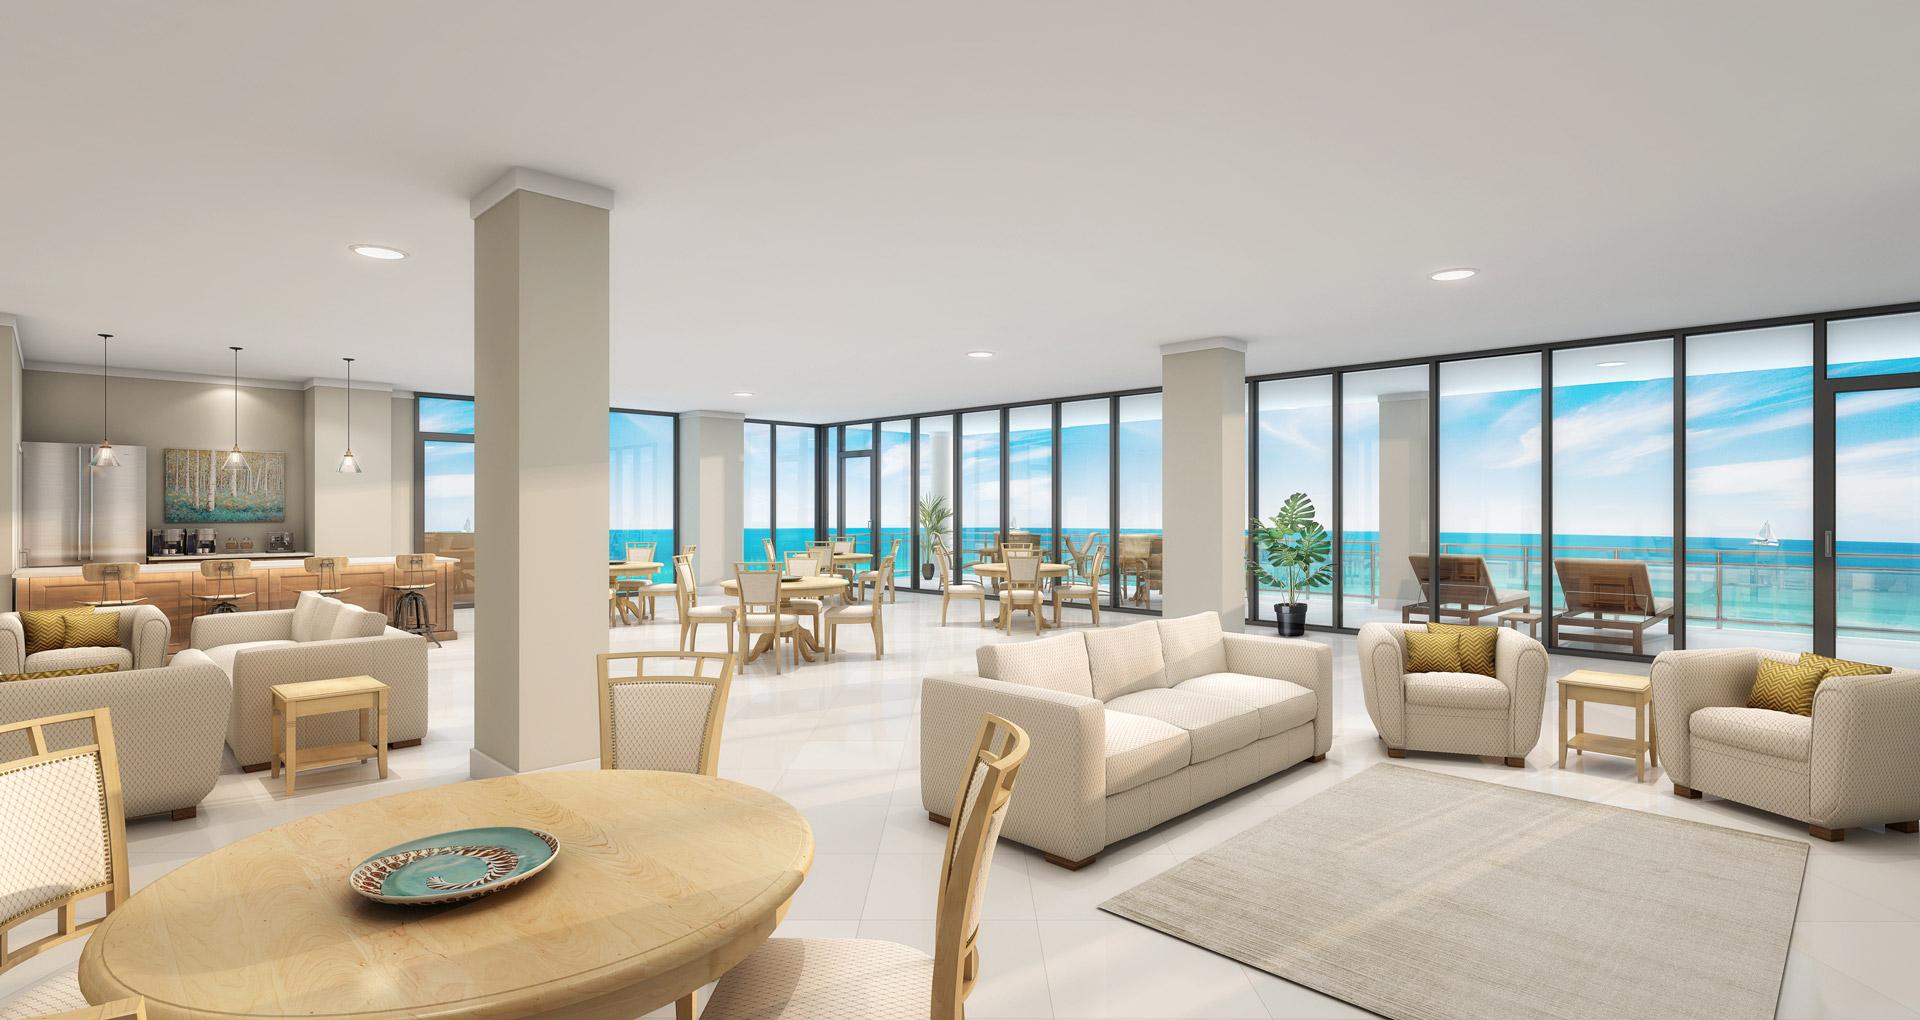 3d rendering of the interior of a penthouse in a beach condominium overlooking the ocean.